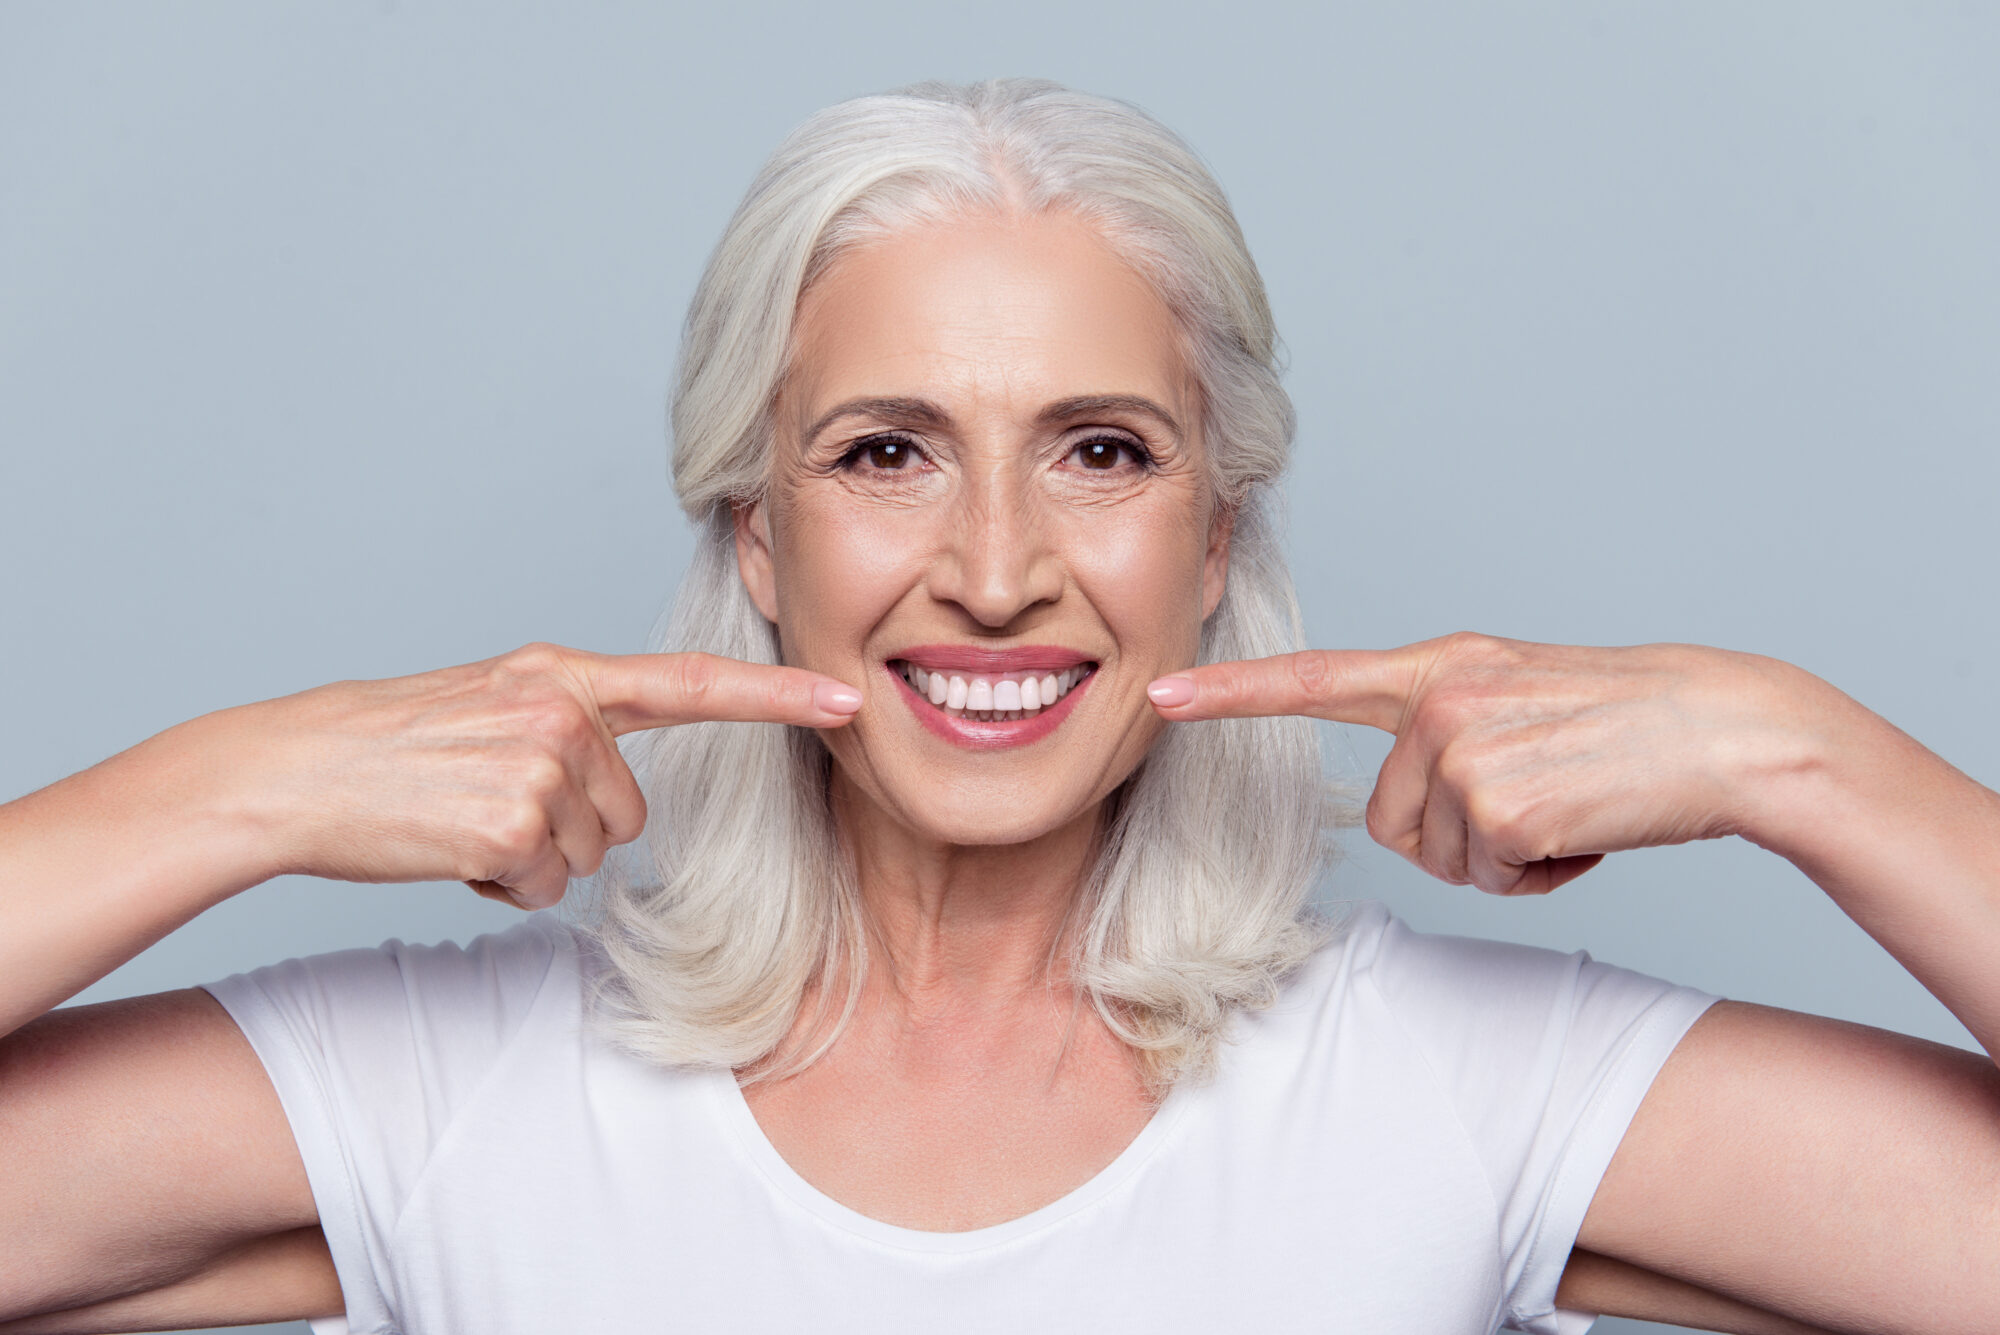 Close up portrait of happy with beaming smile female pensioner pointing on her perfect clear white teeth, isolated on gray background